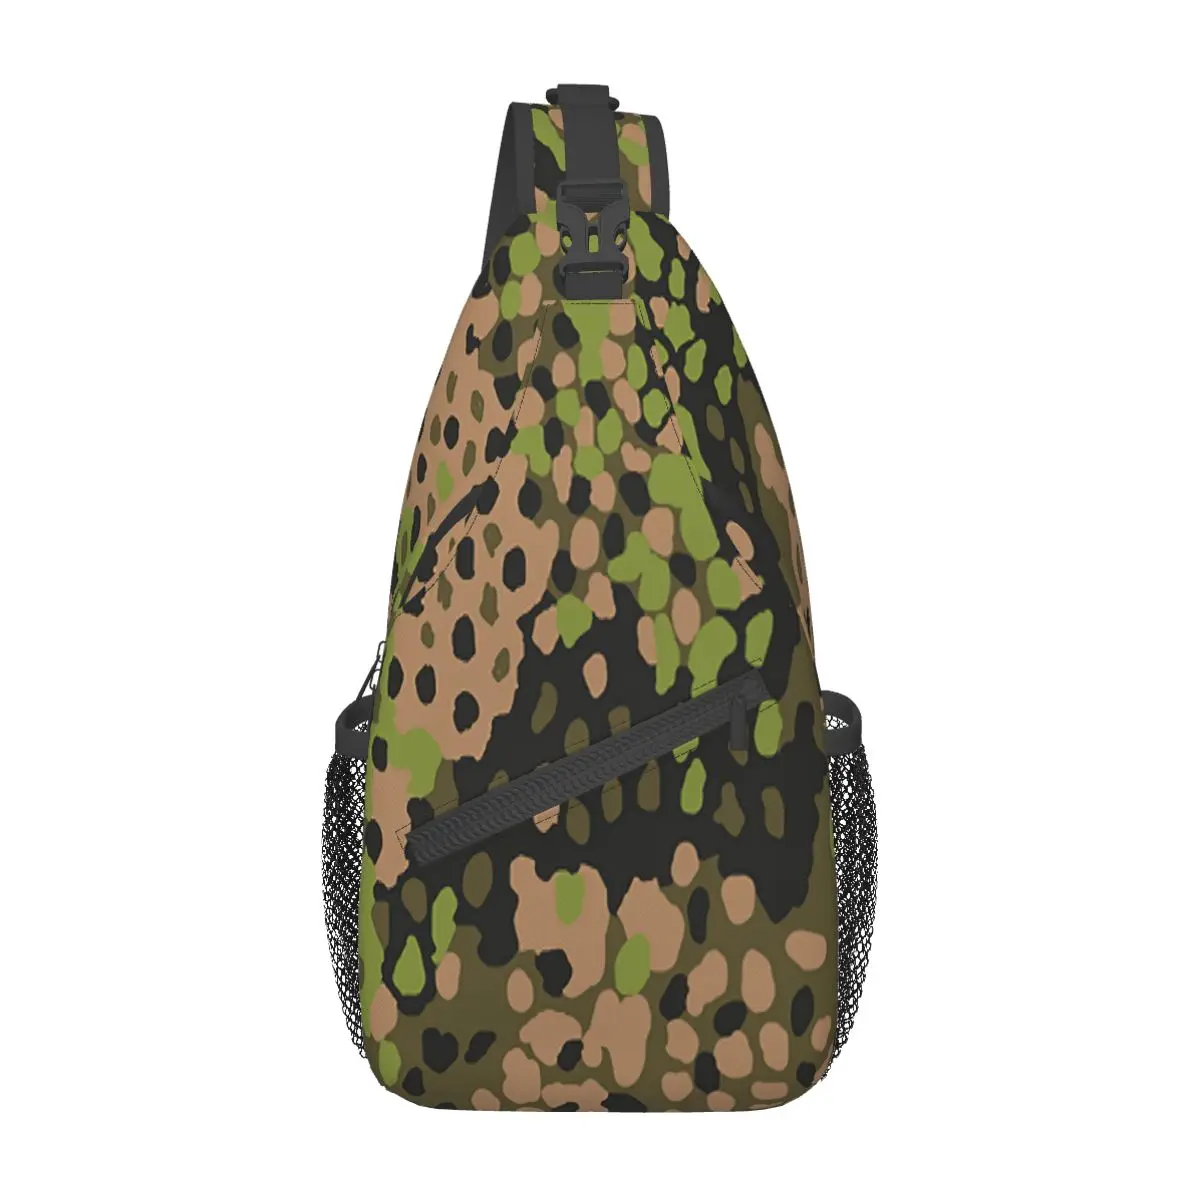 

WW2 SS Erbsentarn Camouflage Crossbody Sling Bag SmallChest Bag Camo Army Shoulder Backpack Daypack for Travel Hiking Camping